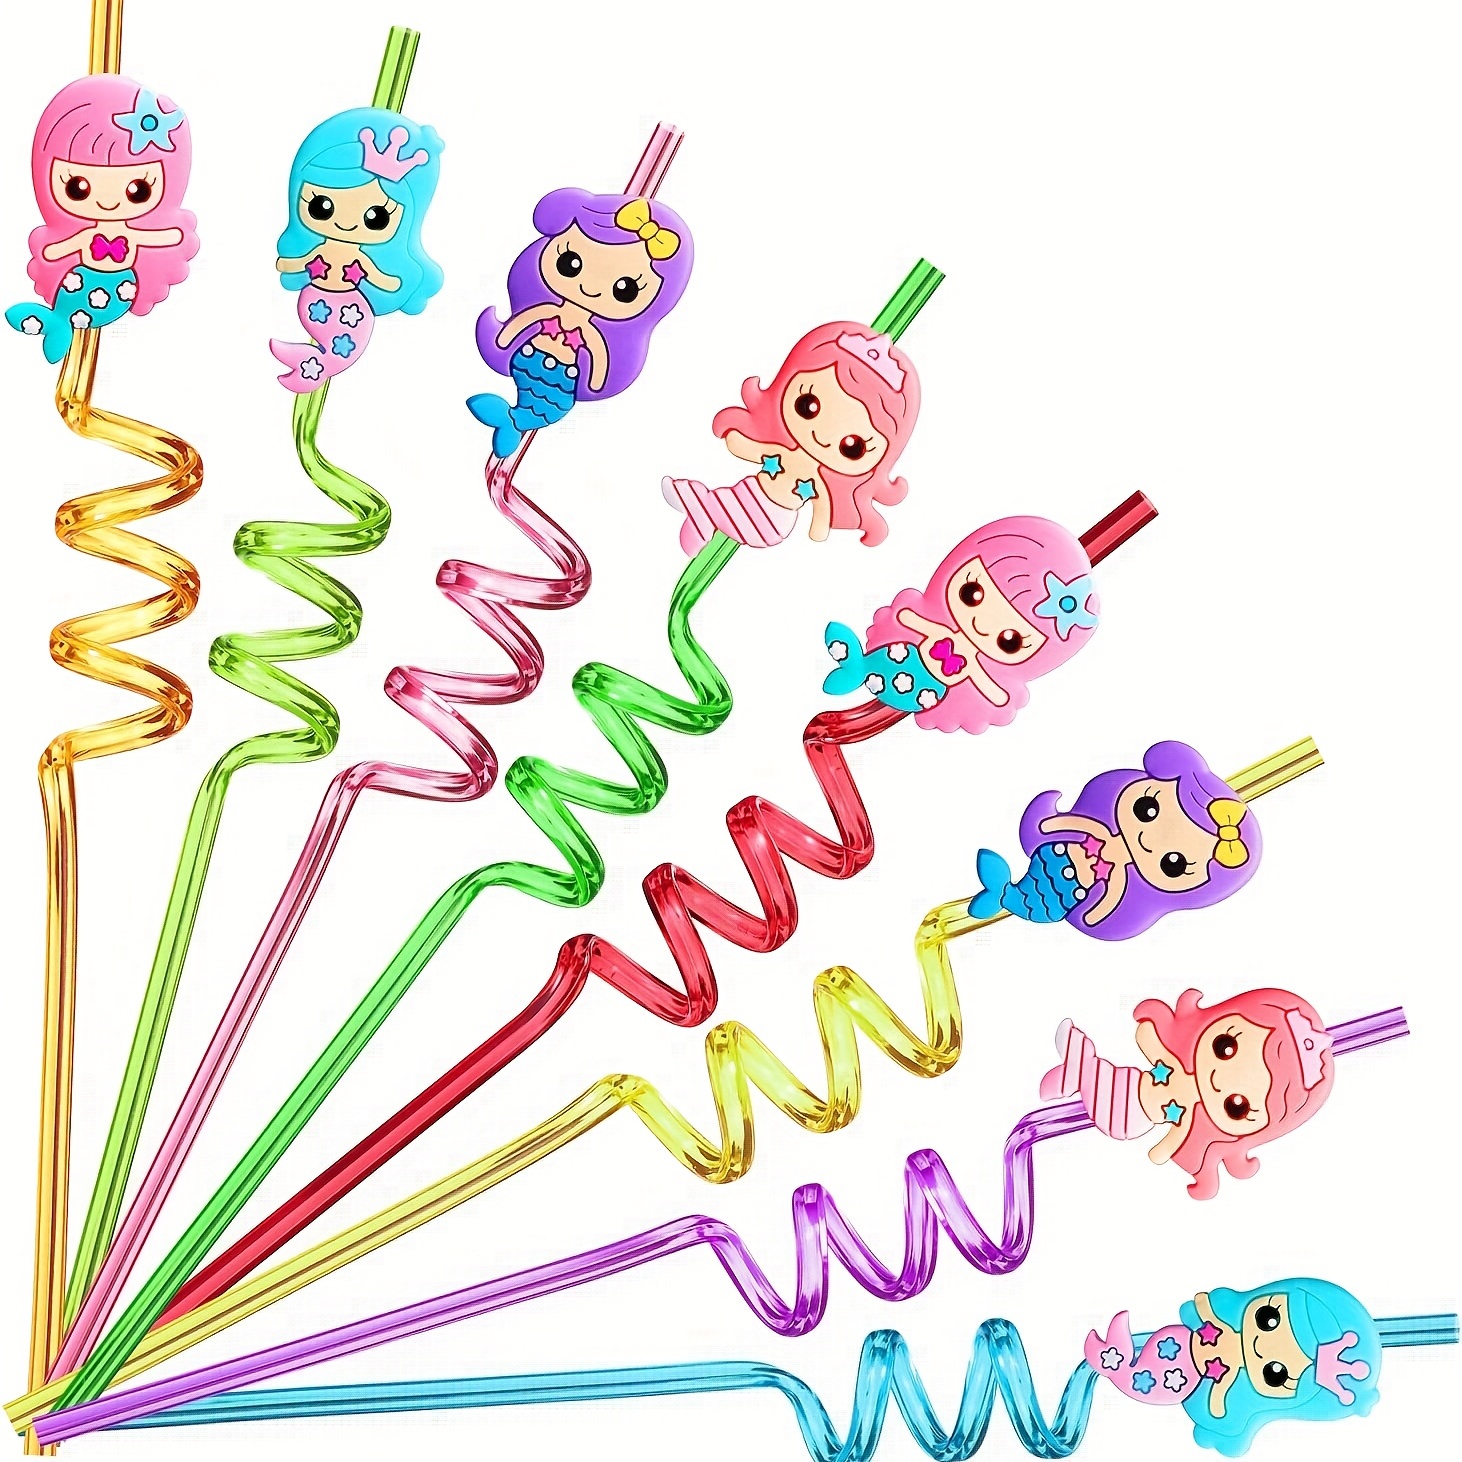 6 Count Loopy Straws, Assorted Colors, Reusable Plastic Crazy Loop Straws for Birthday Party or Classroom Activities, Size: 11 in Length